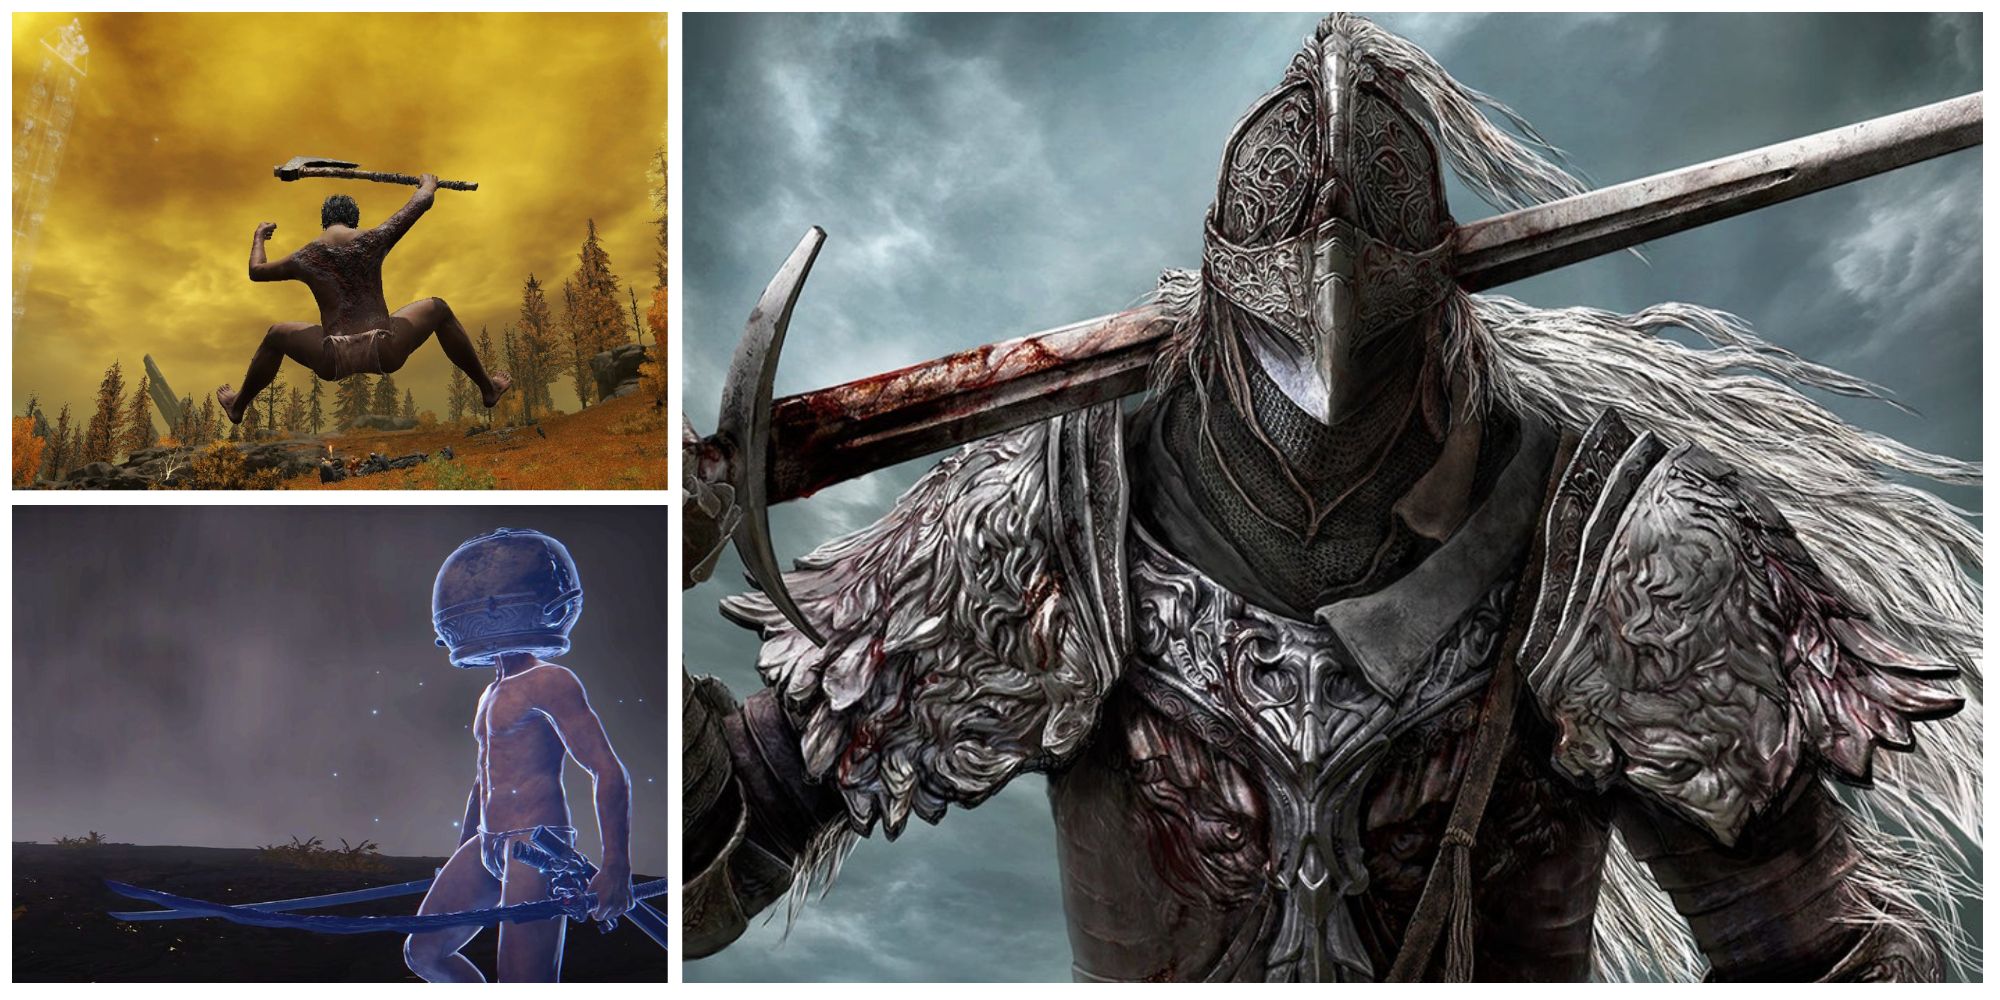 From Demon's Souls to Elden Ring: Every FromSoftware Soulsborne